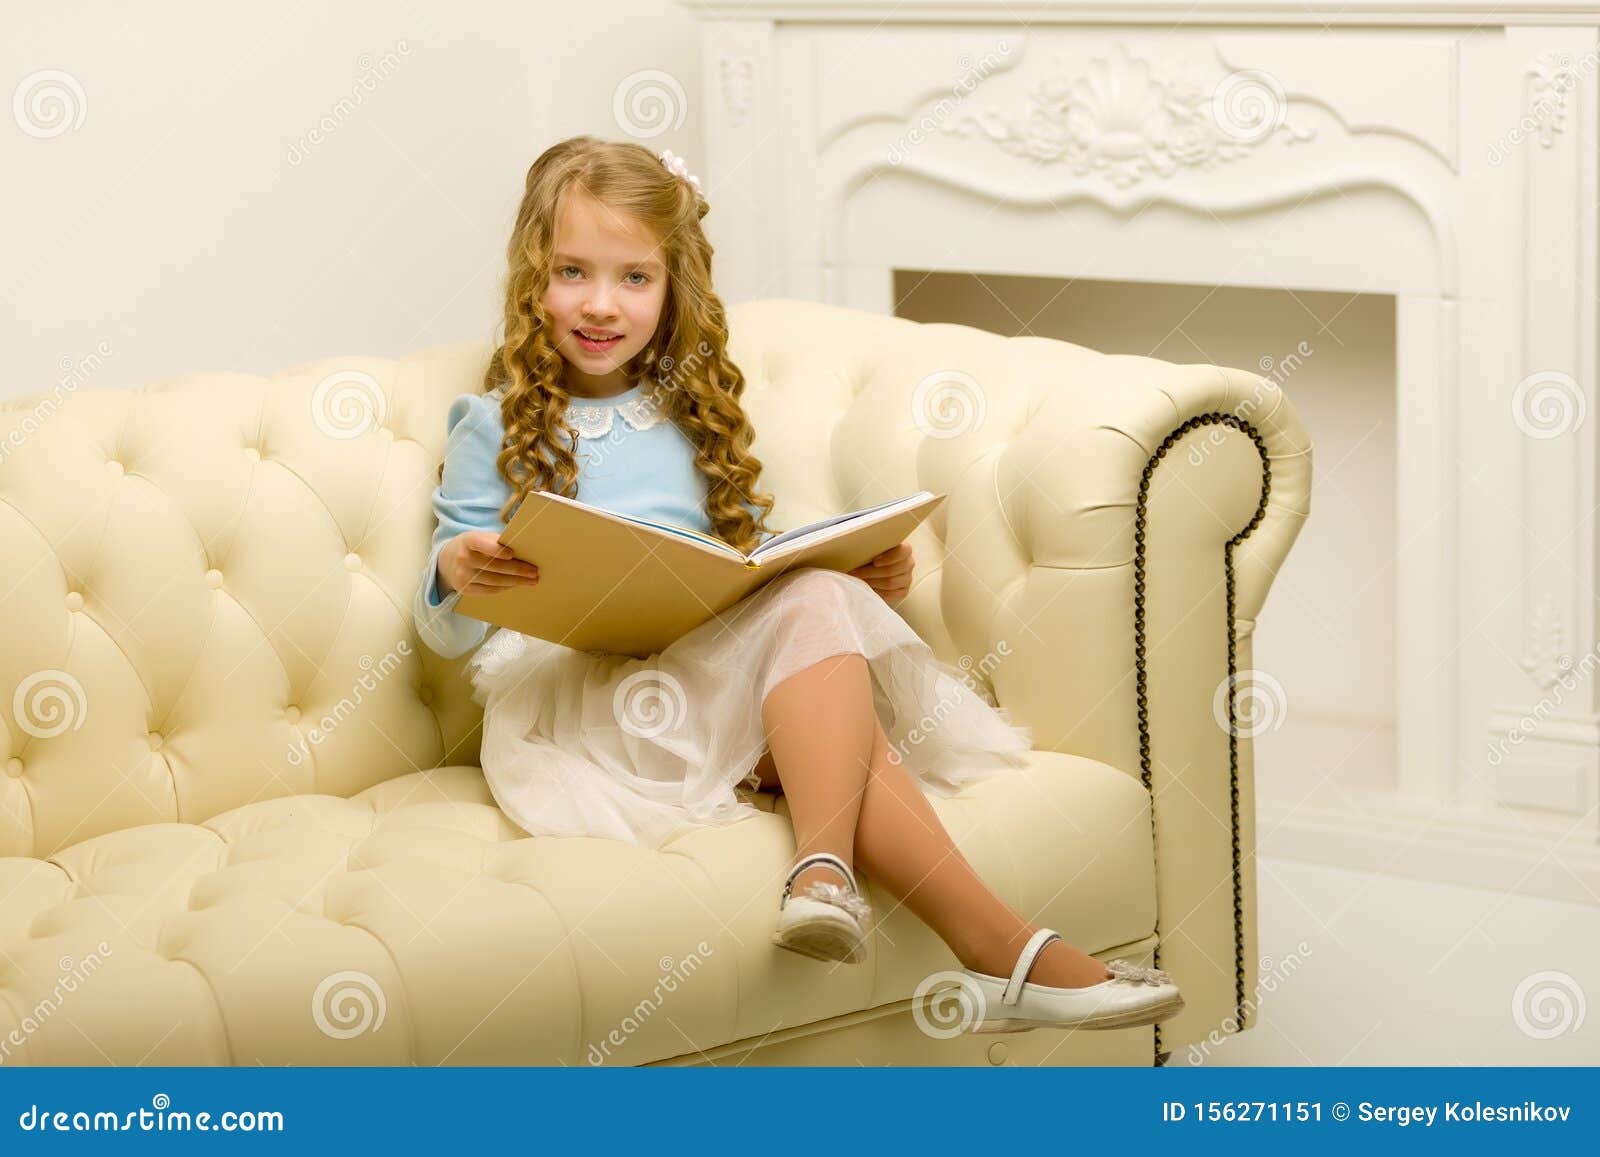 Little Girl Is Sitting On The Couch Stock Image Image of